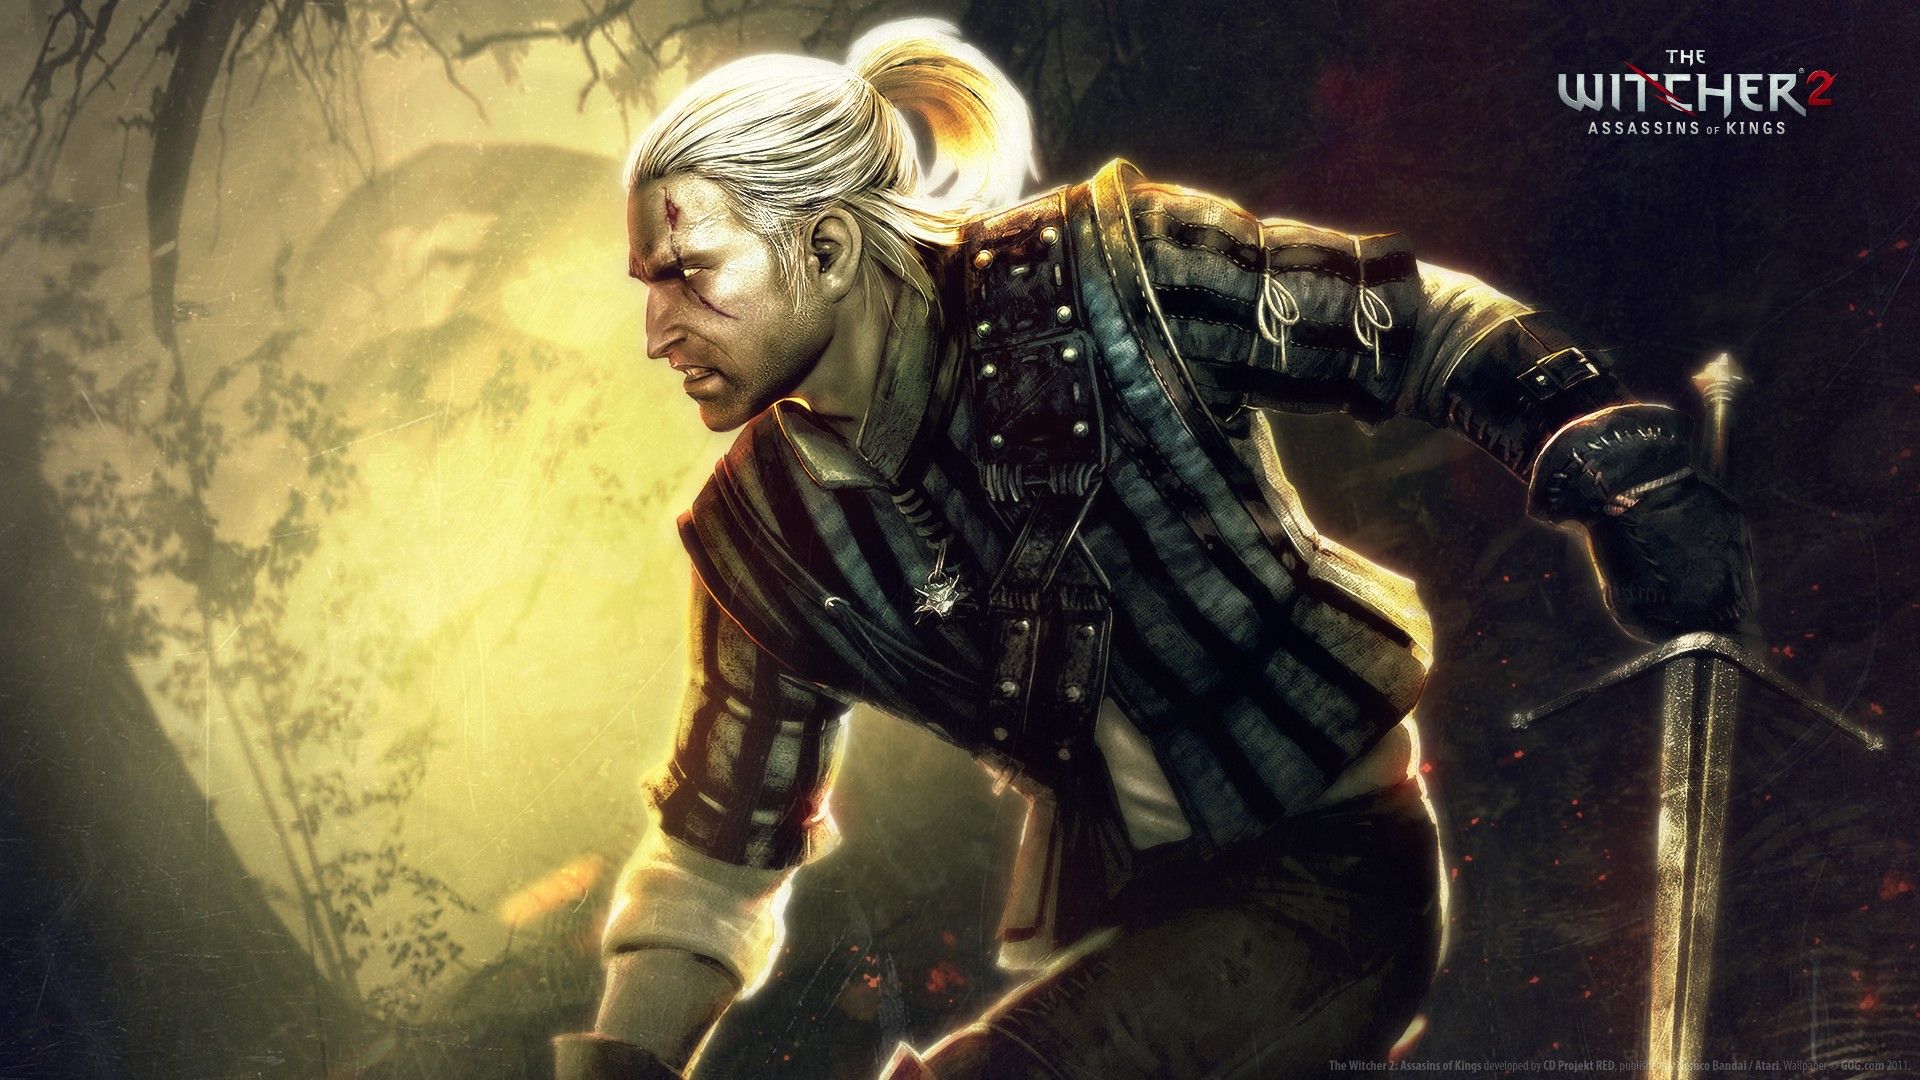 The Witcher 2 Assassins Of Kings Wallpaper HD / Desktop and Mobile Background